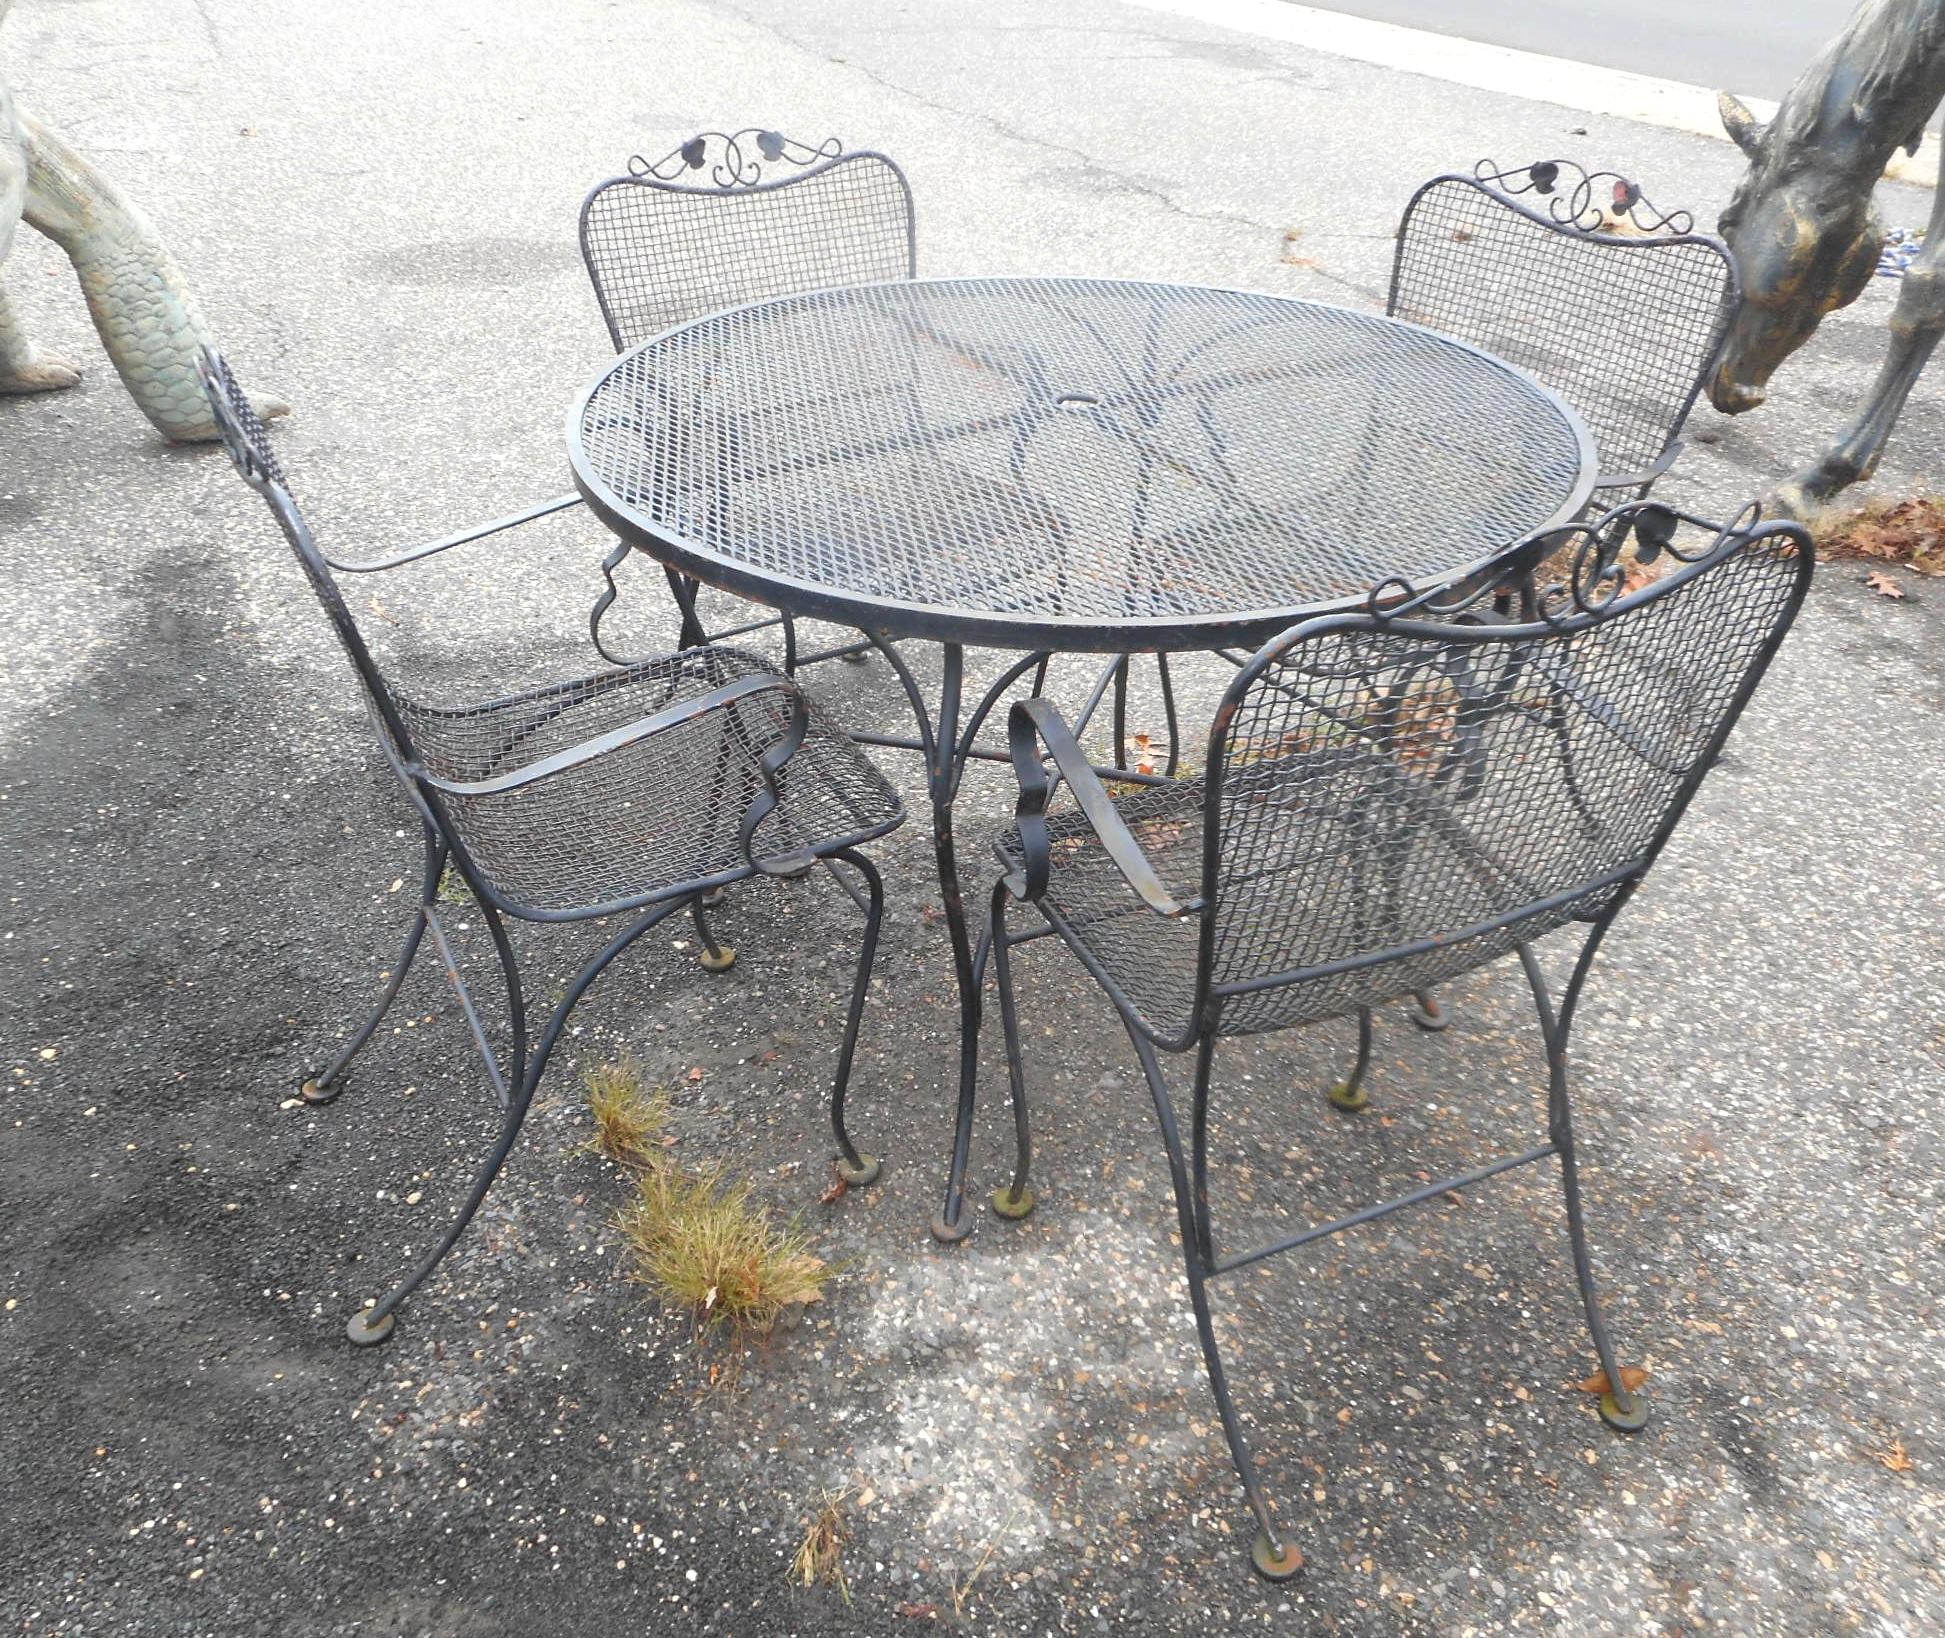 This beautiful vintage modern patio set includes four dining chairs, a round dining table, and two love seats. Sleek design with floral detail, sculpted iron frames, and mesh seating. The bent wrought iron frame and wonderful contours ensure plenty